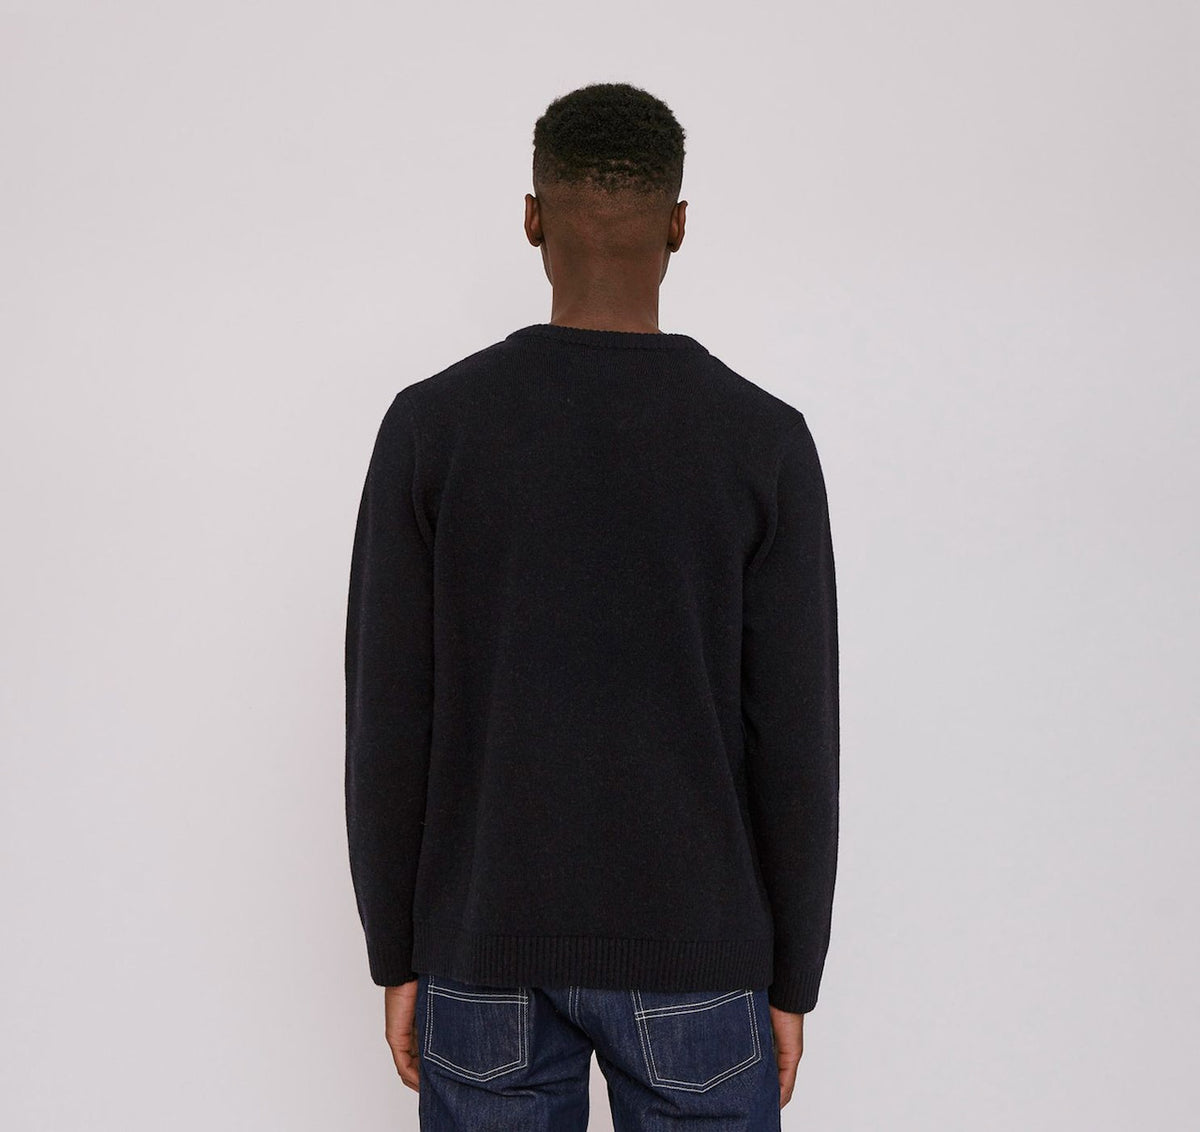 The back view of a man wearing an Organic Basics Recycled Wool Knit Jumper - Navy and jeans.